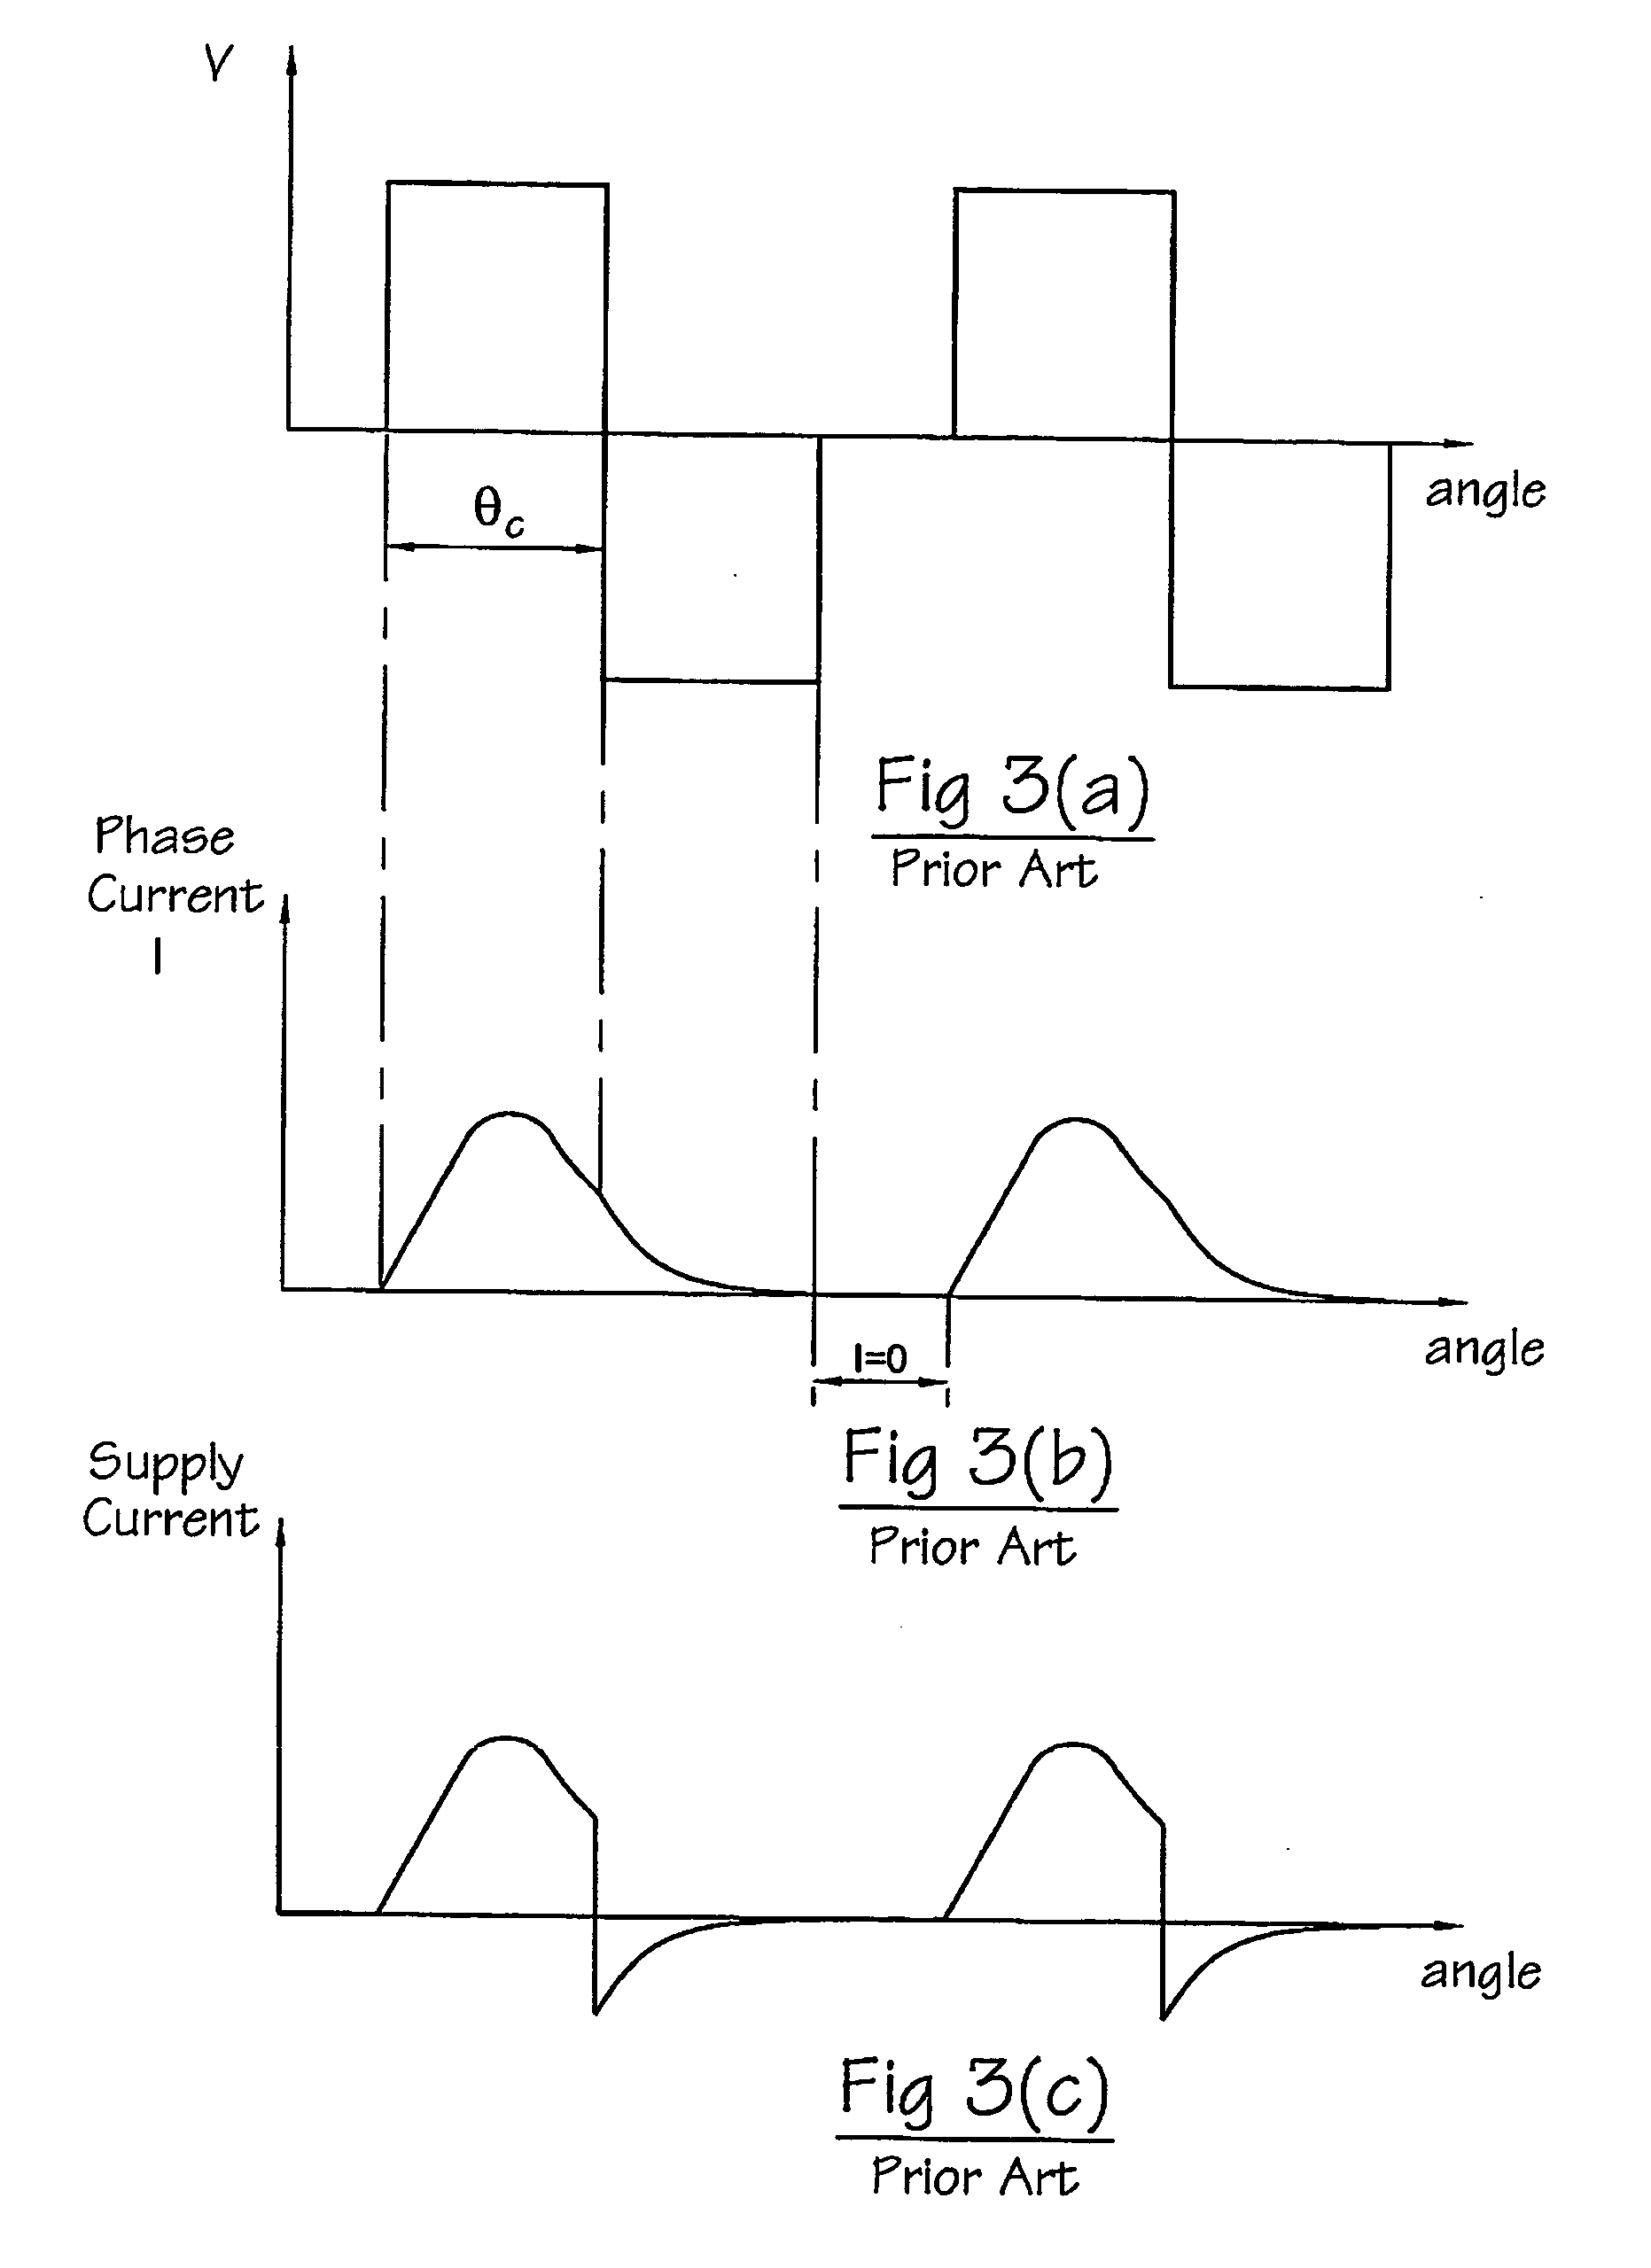 Operation of an electrical machine